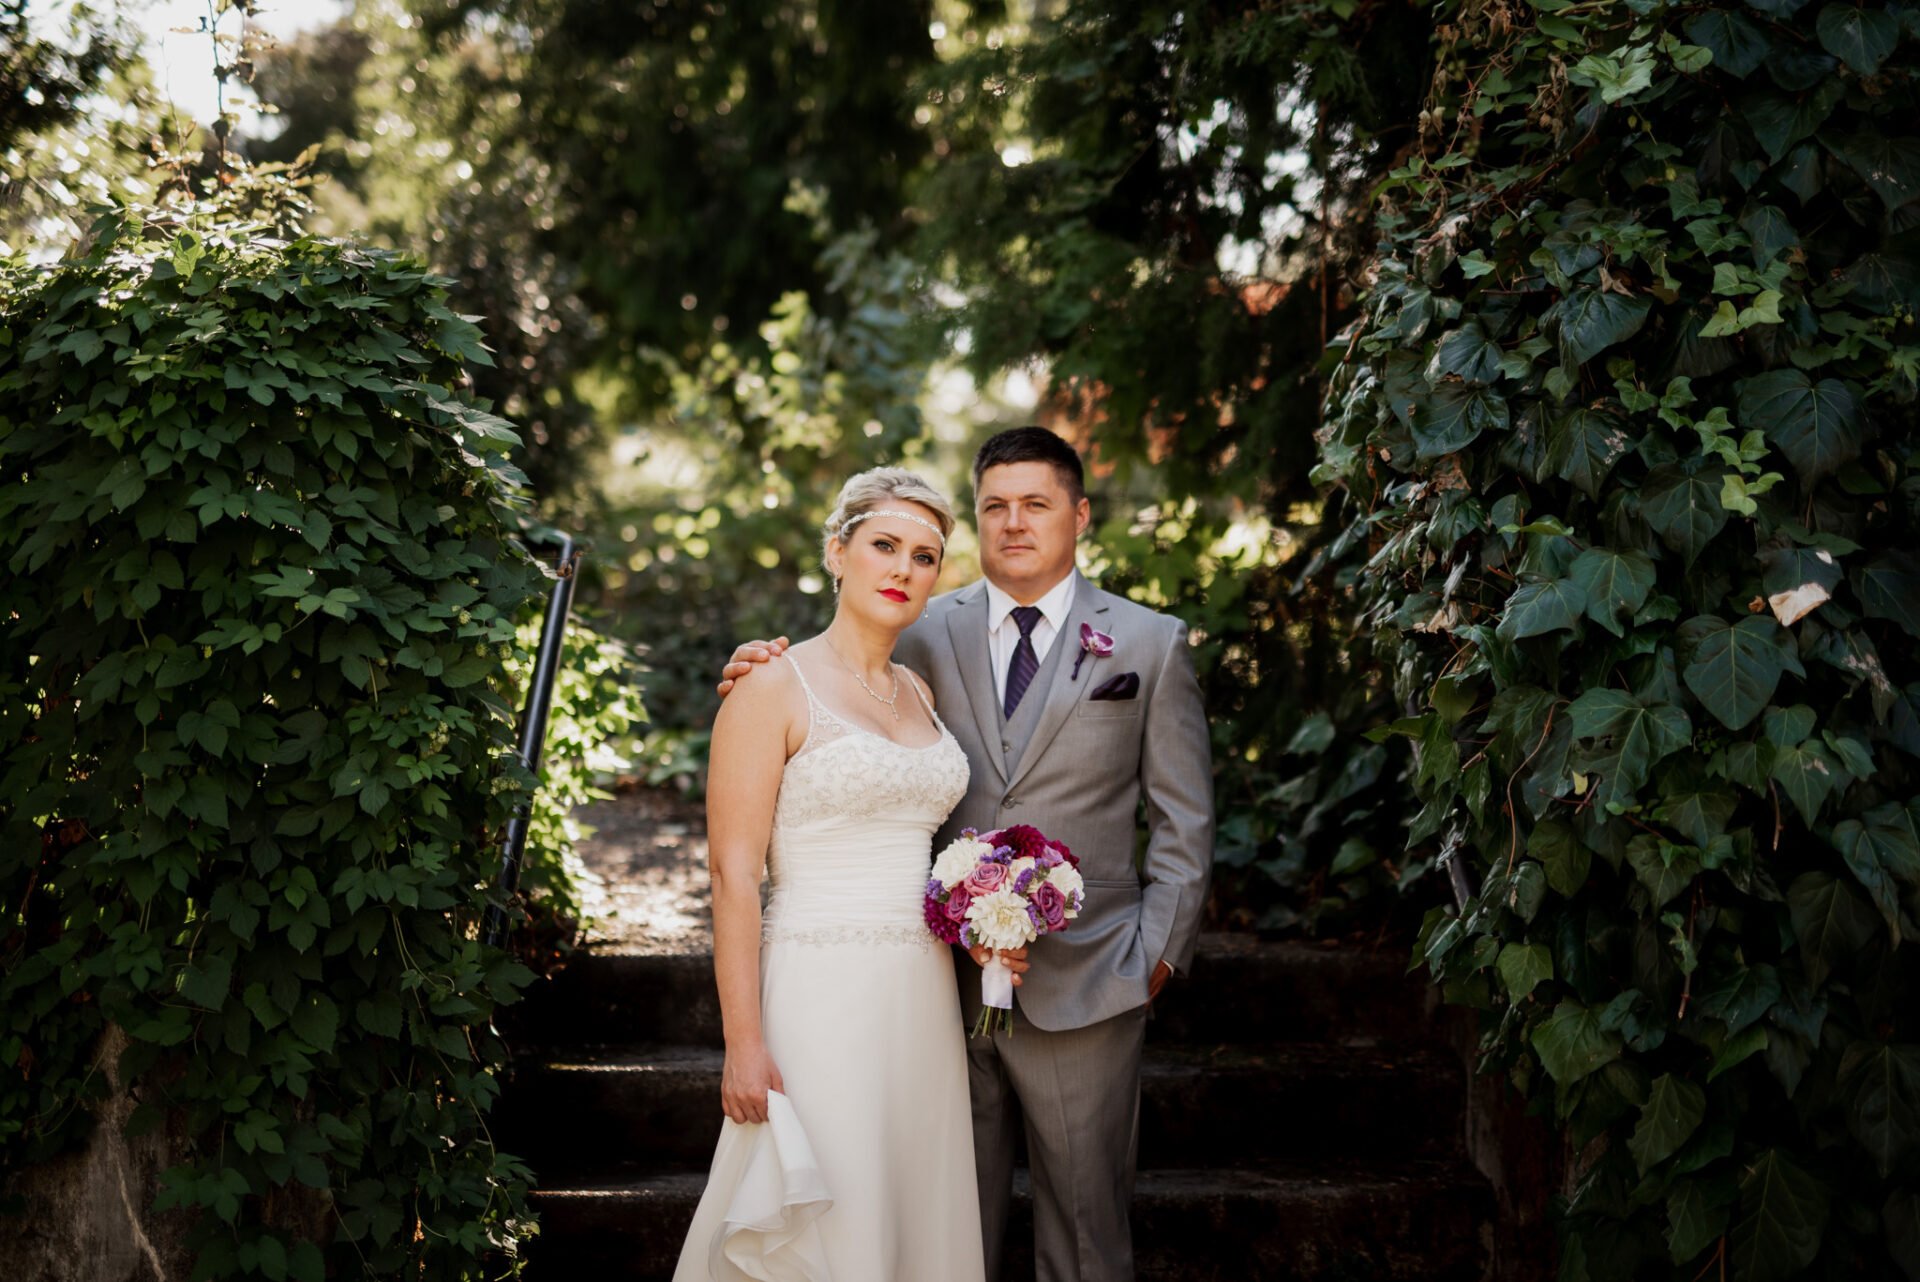 Beautiful Wedding Photography At The Kennedy School